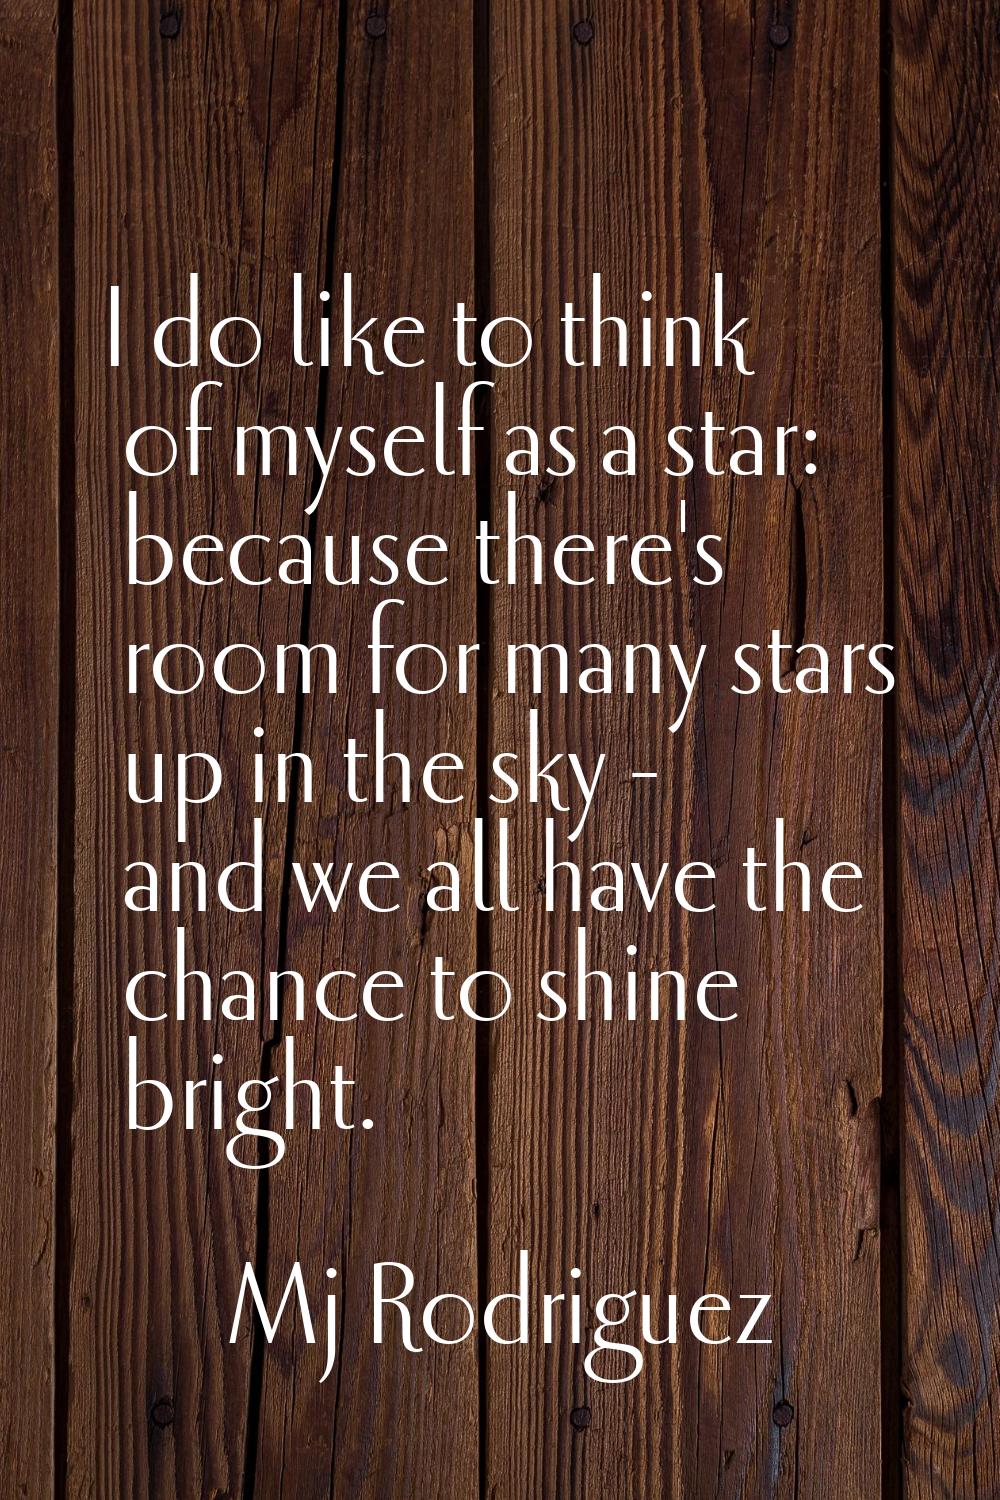 I do like to think of myself as a star: because there's room for many stars up in the sky - and we 